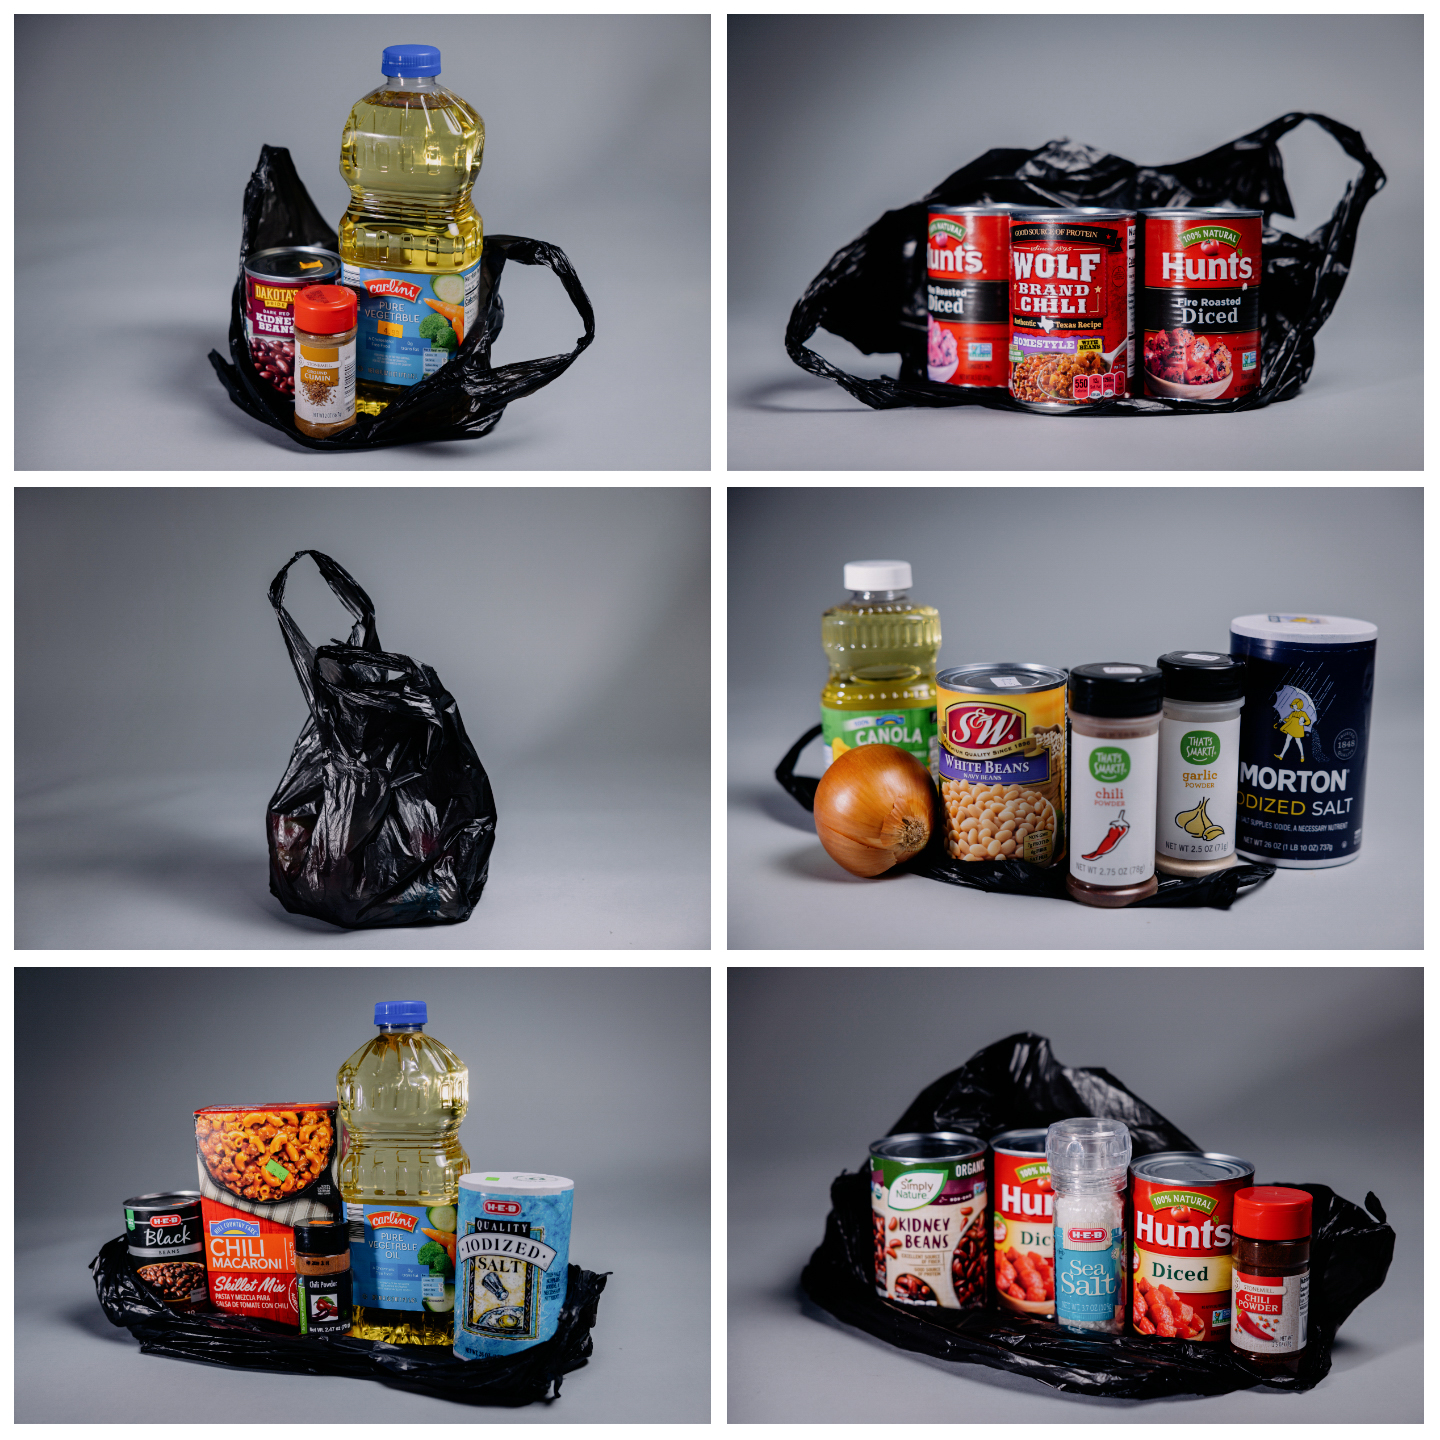 Photo grid of grocery items found in stores in Third Ward.